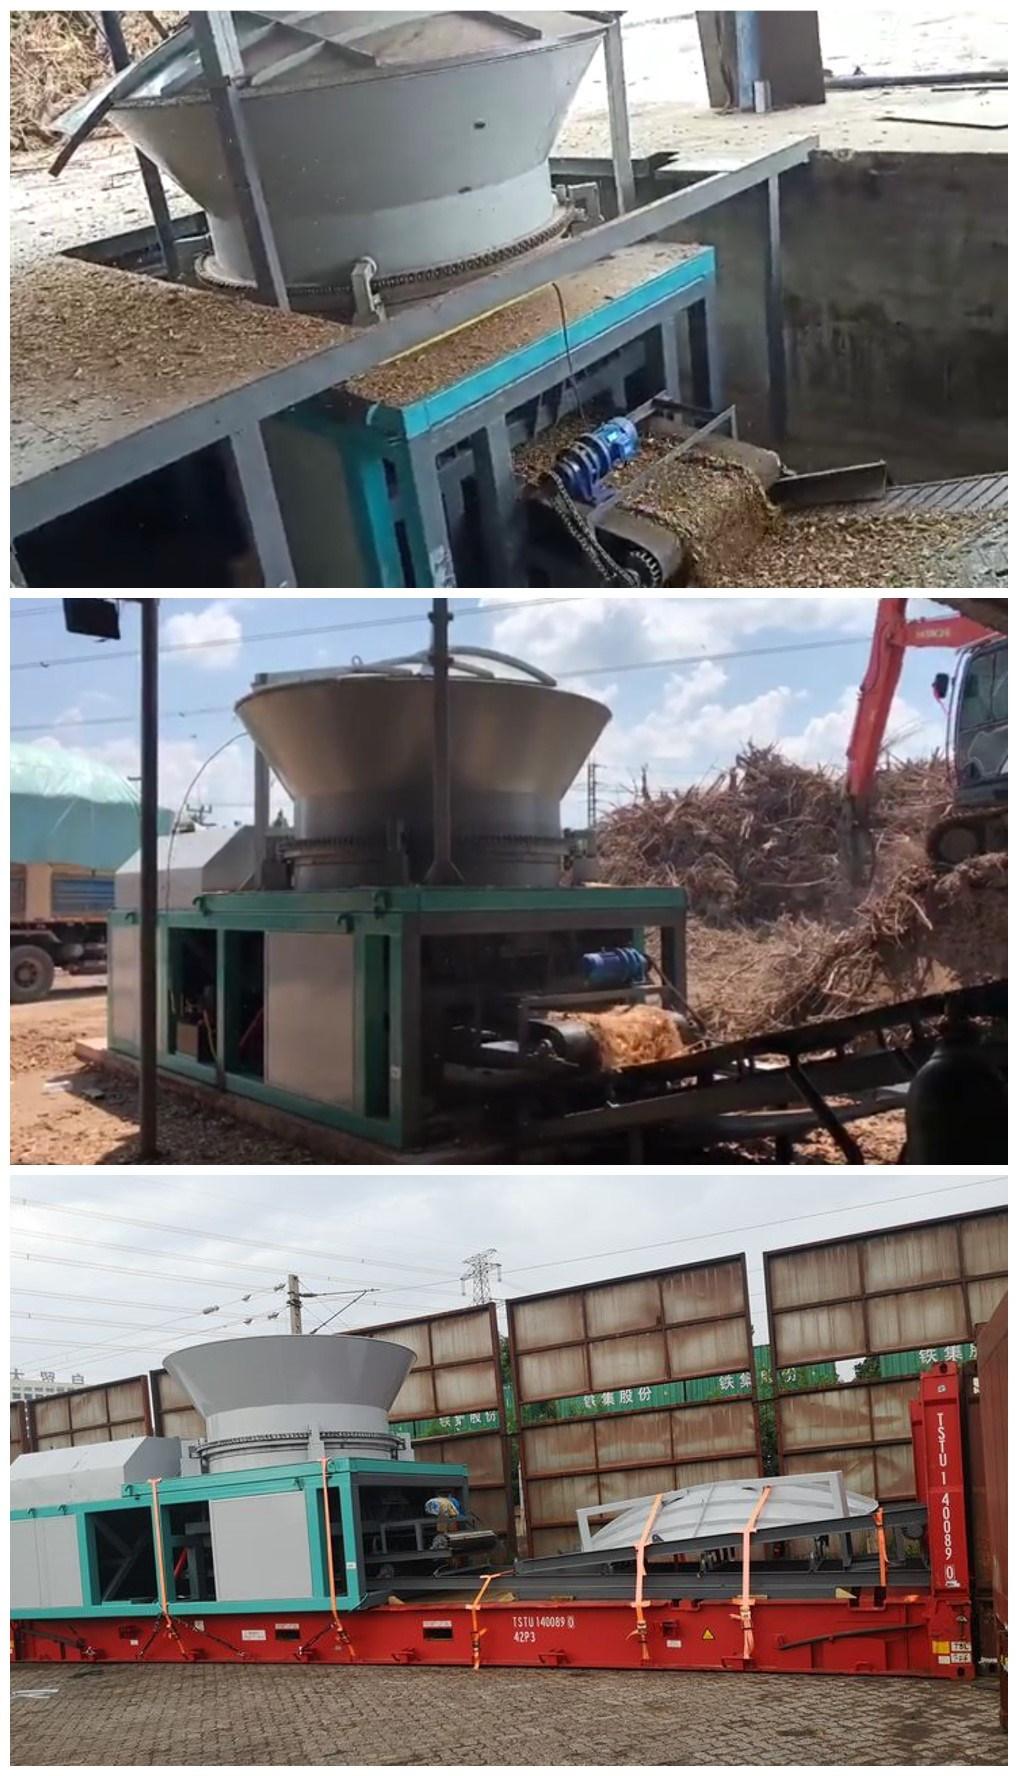 Shd Tree Root Wood Crusher with High Capacity